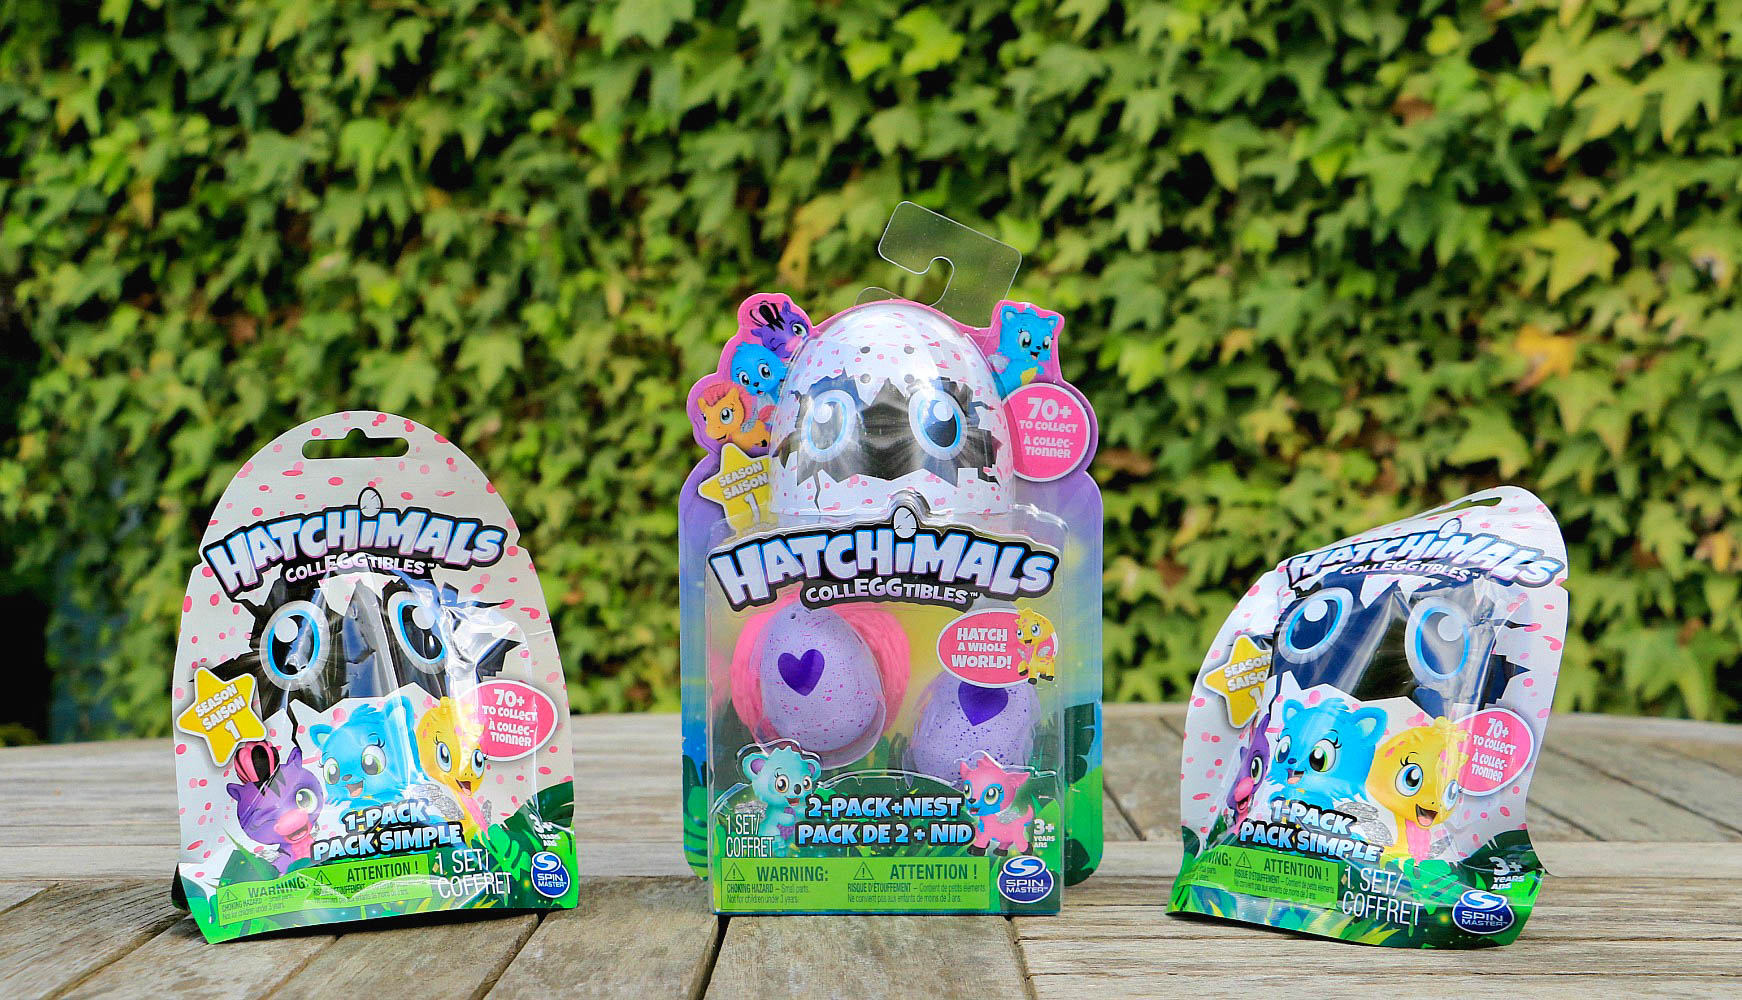 Introducing Hatchimals Colleggtibles Podcast